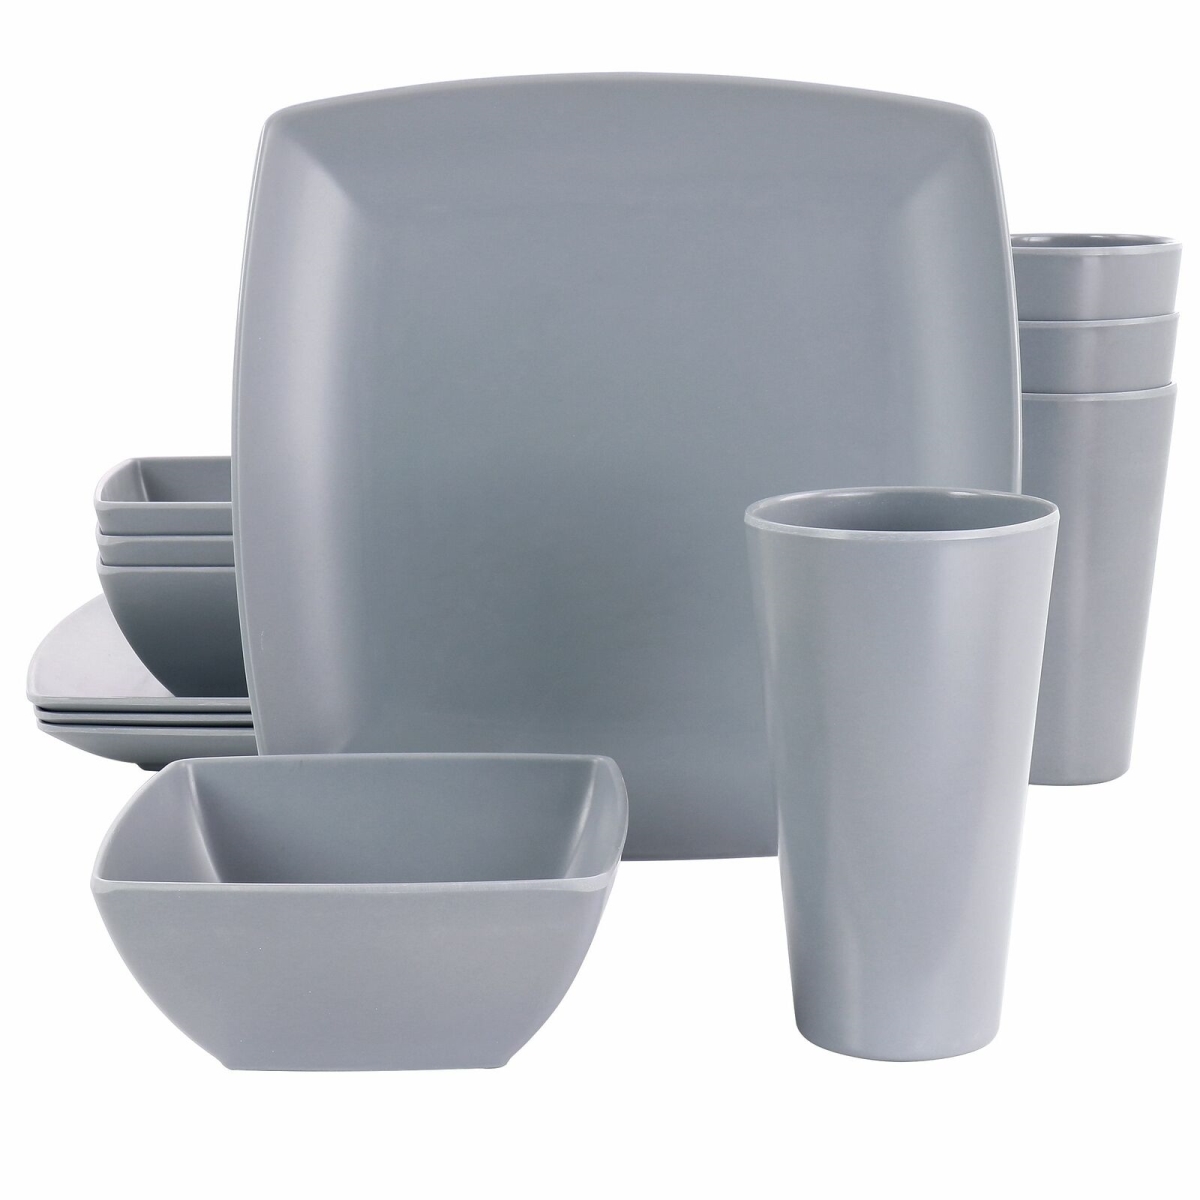 Picture of Gibson Home 97563.12 Grayson Melamine Square Dinnerware Set, Gray - 12 Piece